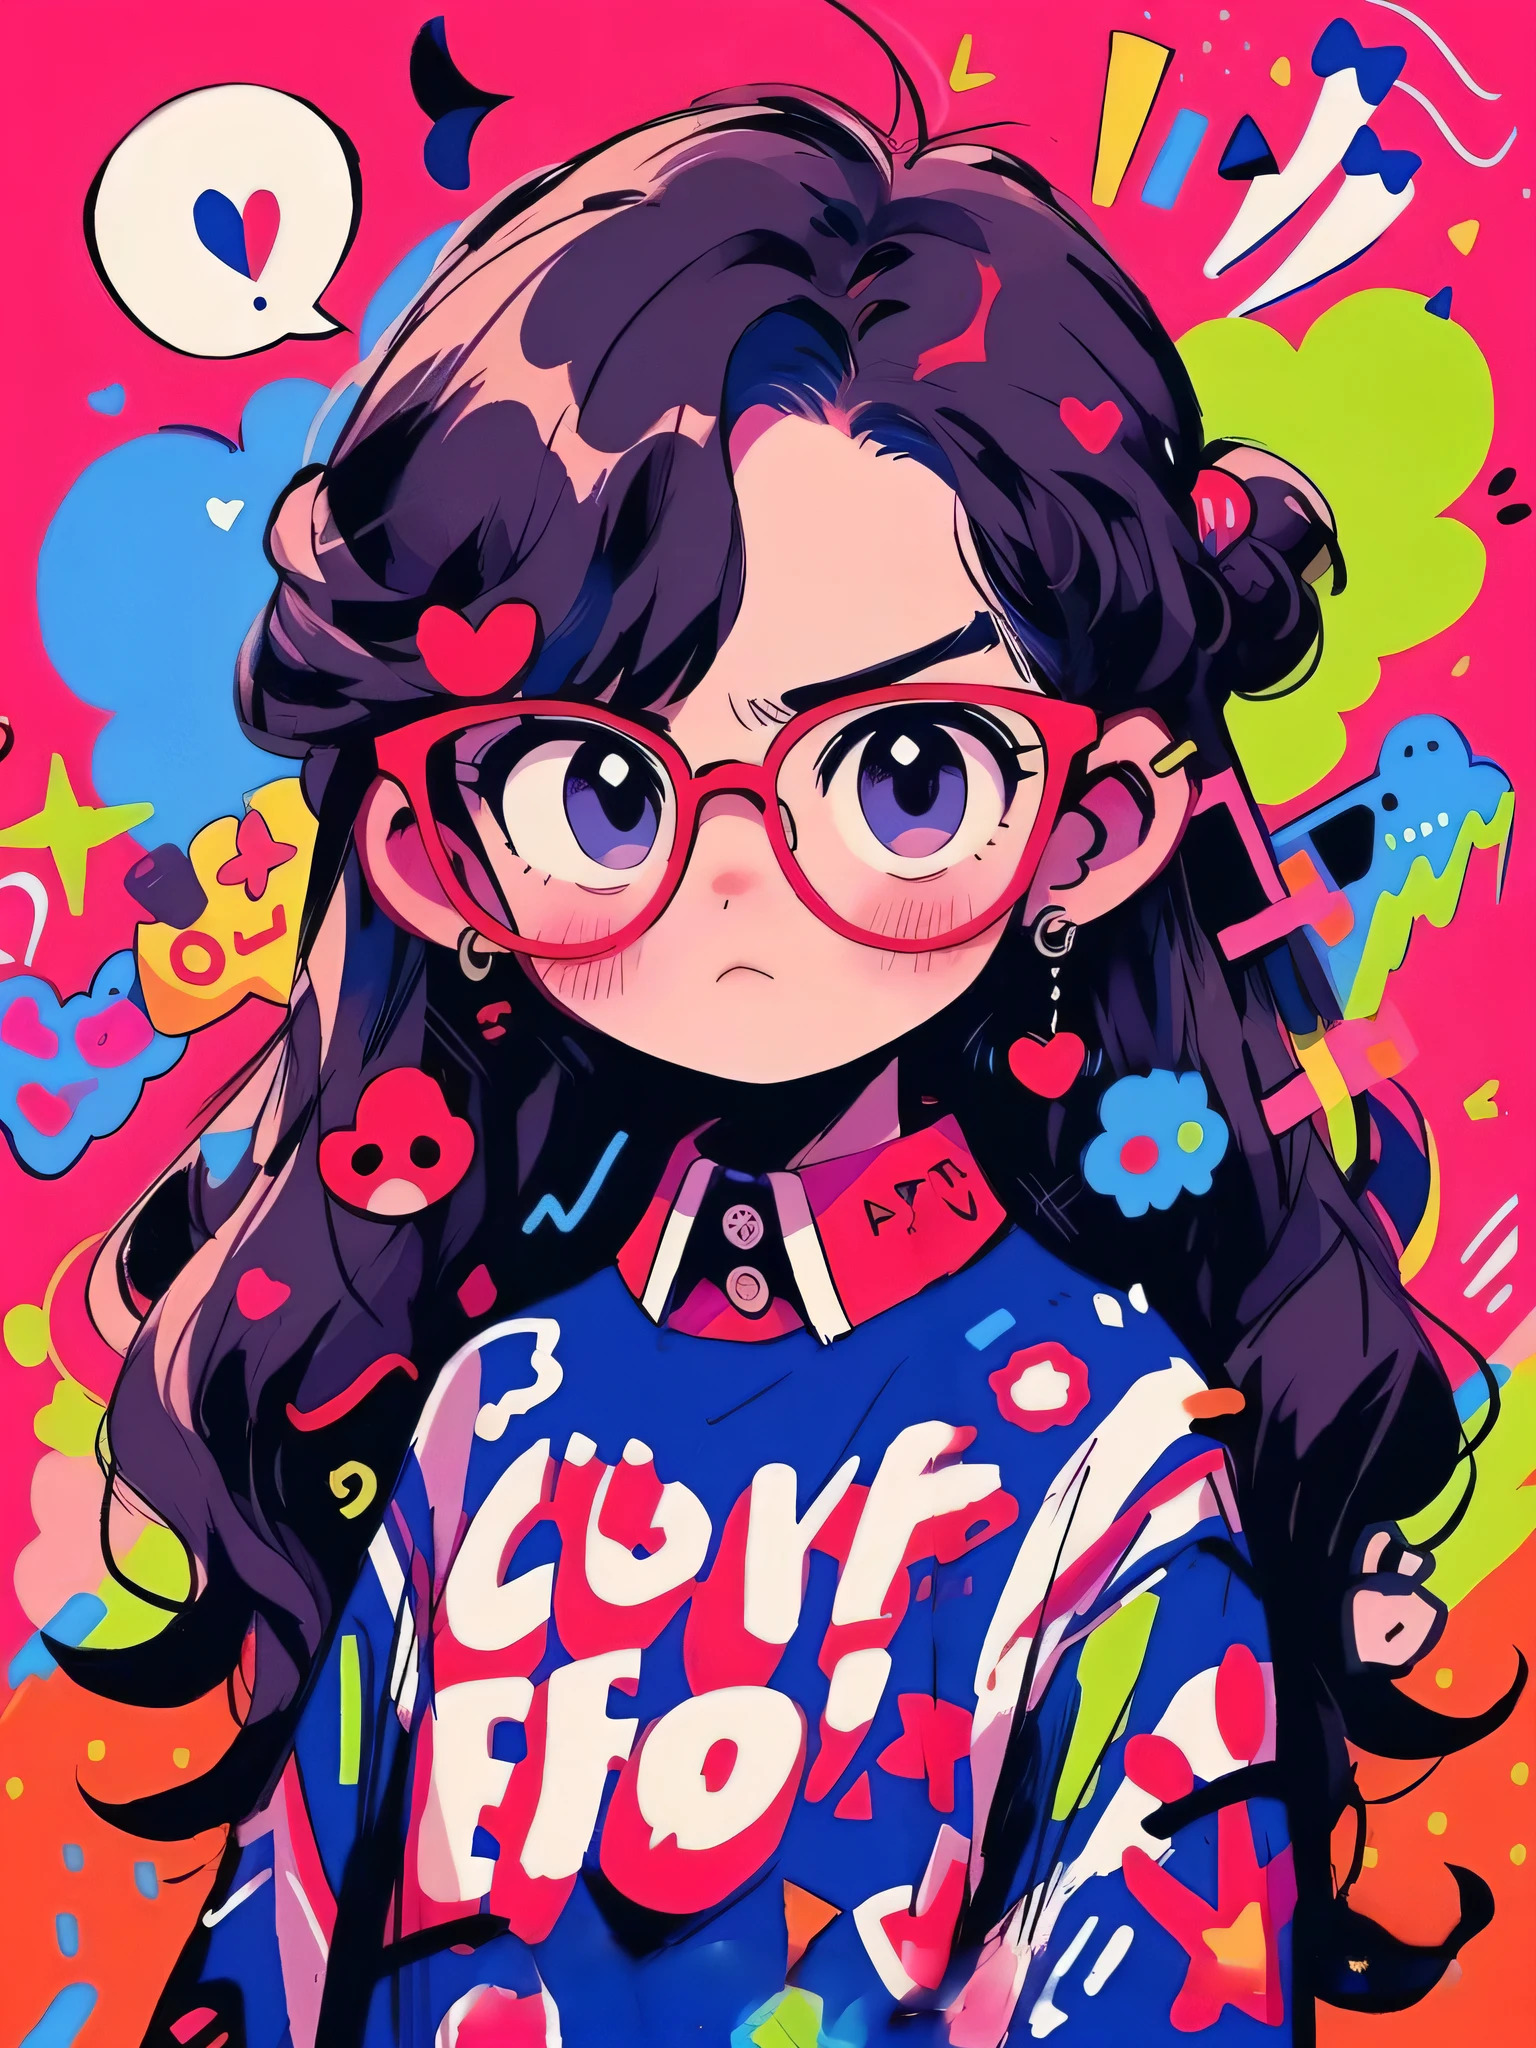 A girl with glasses and a colorful shirt，It has a heart shape on it, lovely art style, decora inspired illustrations, Colorful! Character design, anime visual of a cute girl, Anime style illustration, Cute detailed digital art, urban girl fanart, anime moe art style, lofi-girl, Cartoon Art Style, colorful illustrations, Retro anime girl, hyper colorful